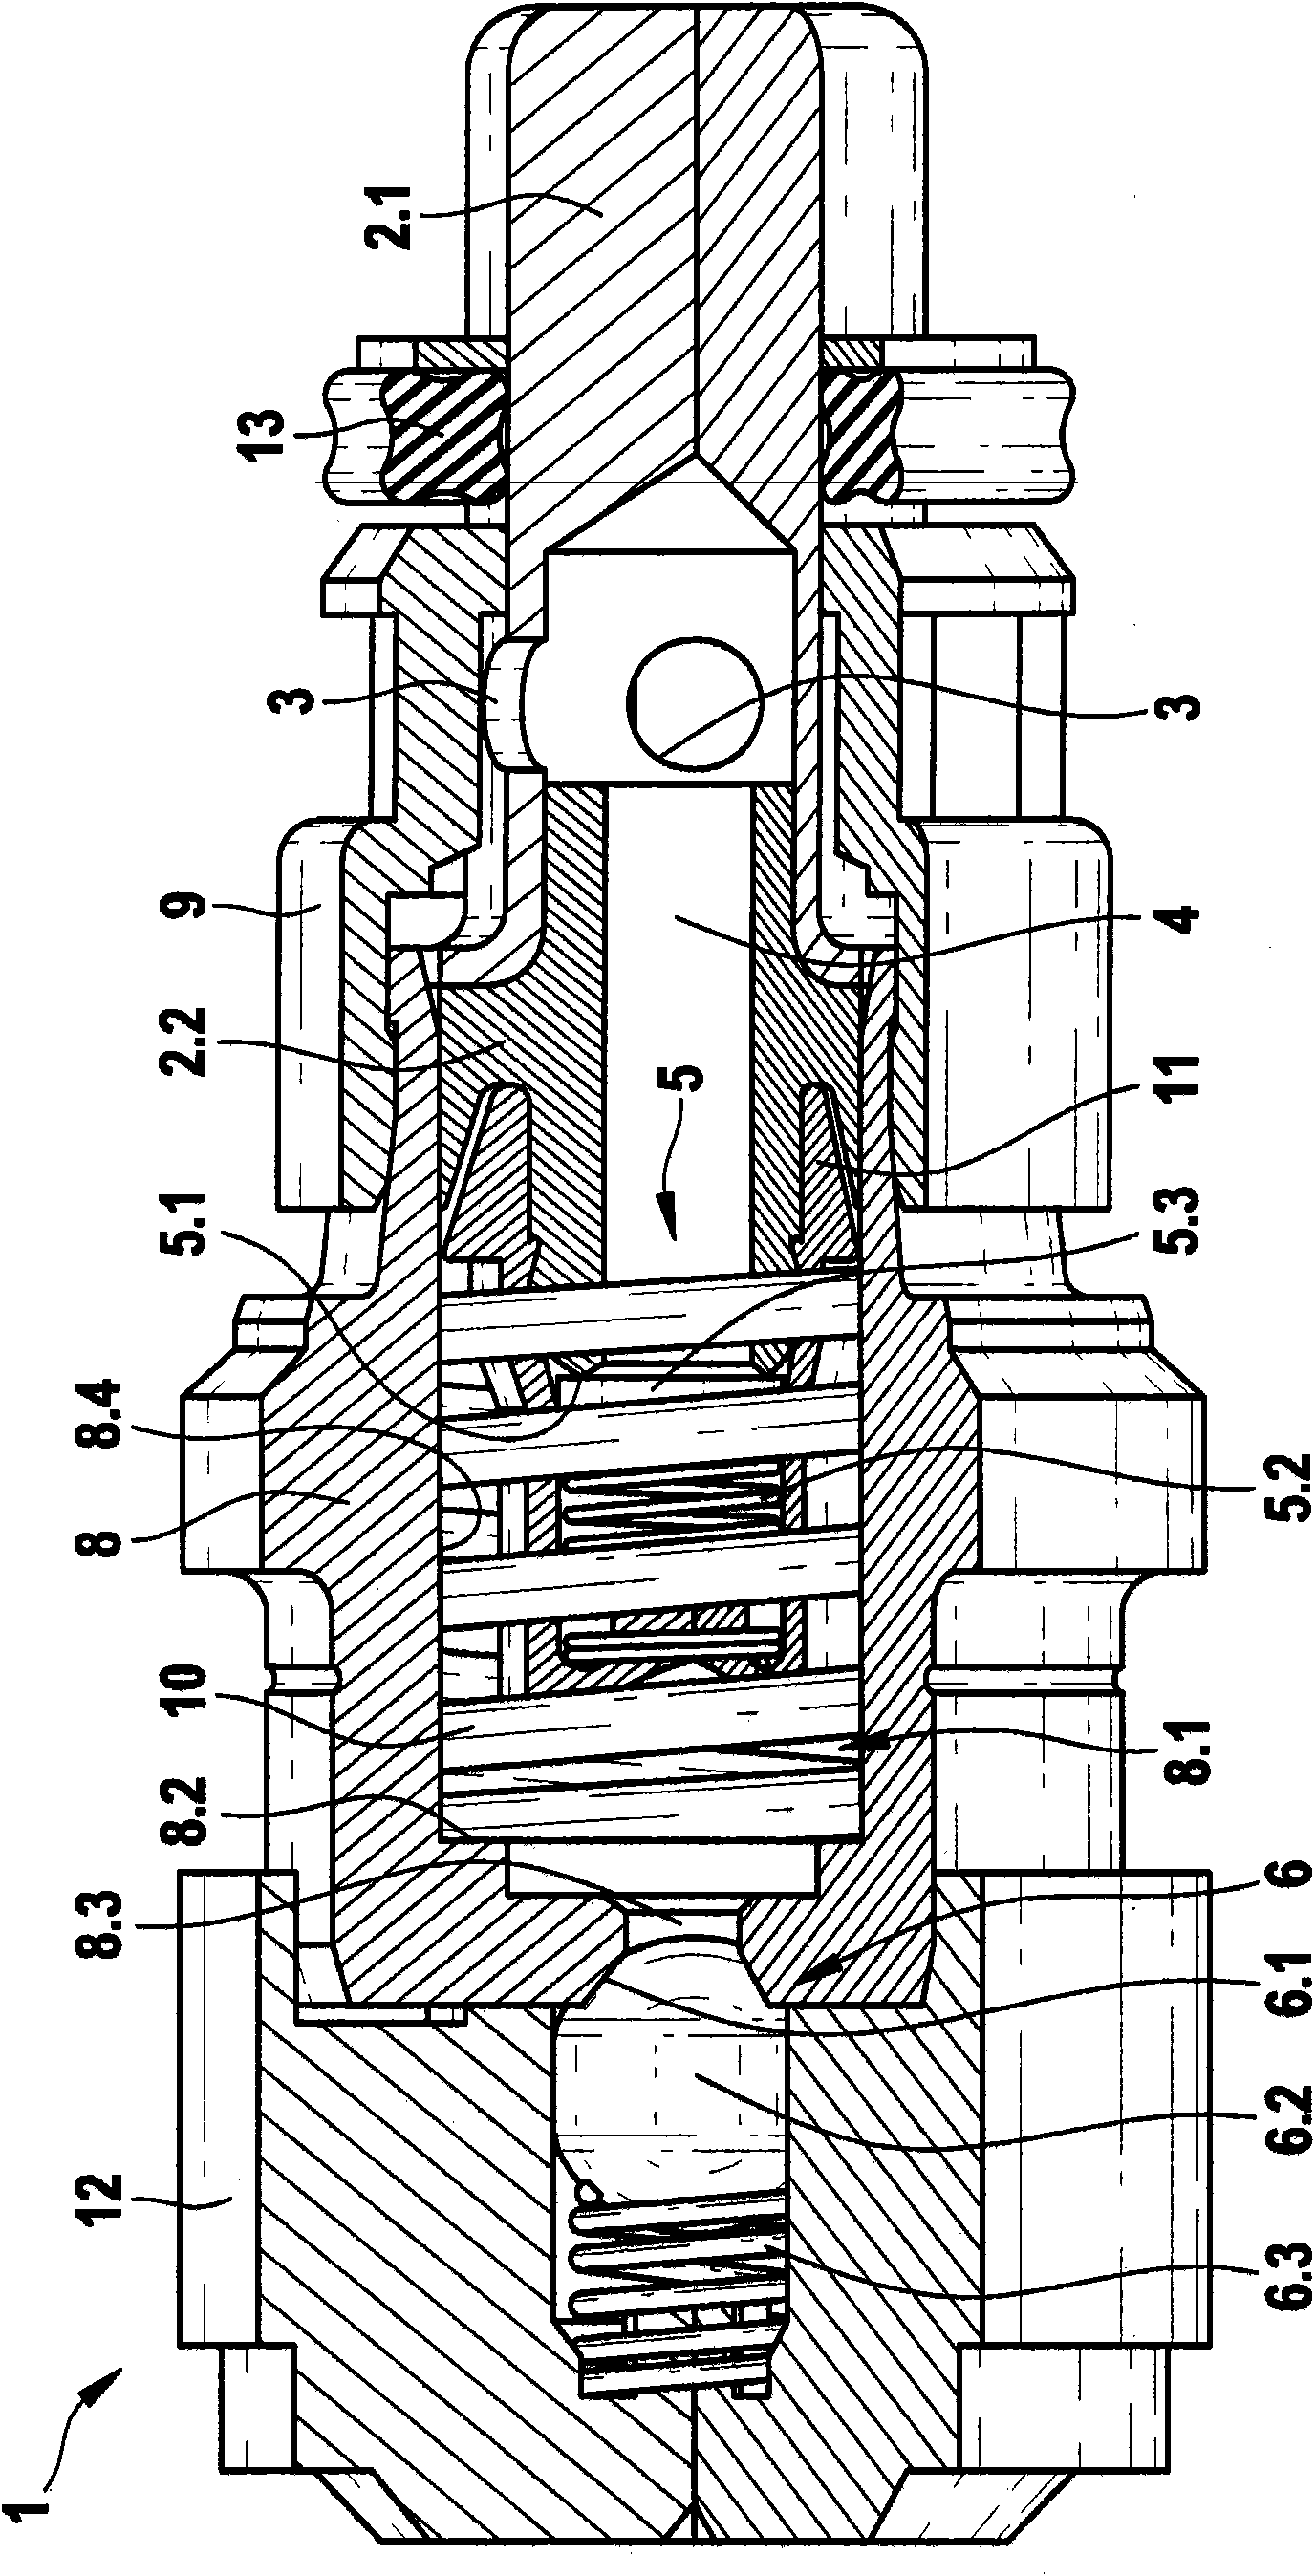 Piston pump for conveying a fluid and associated braking system